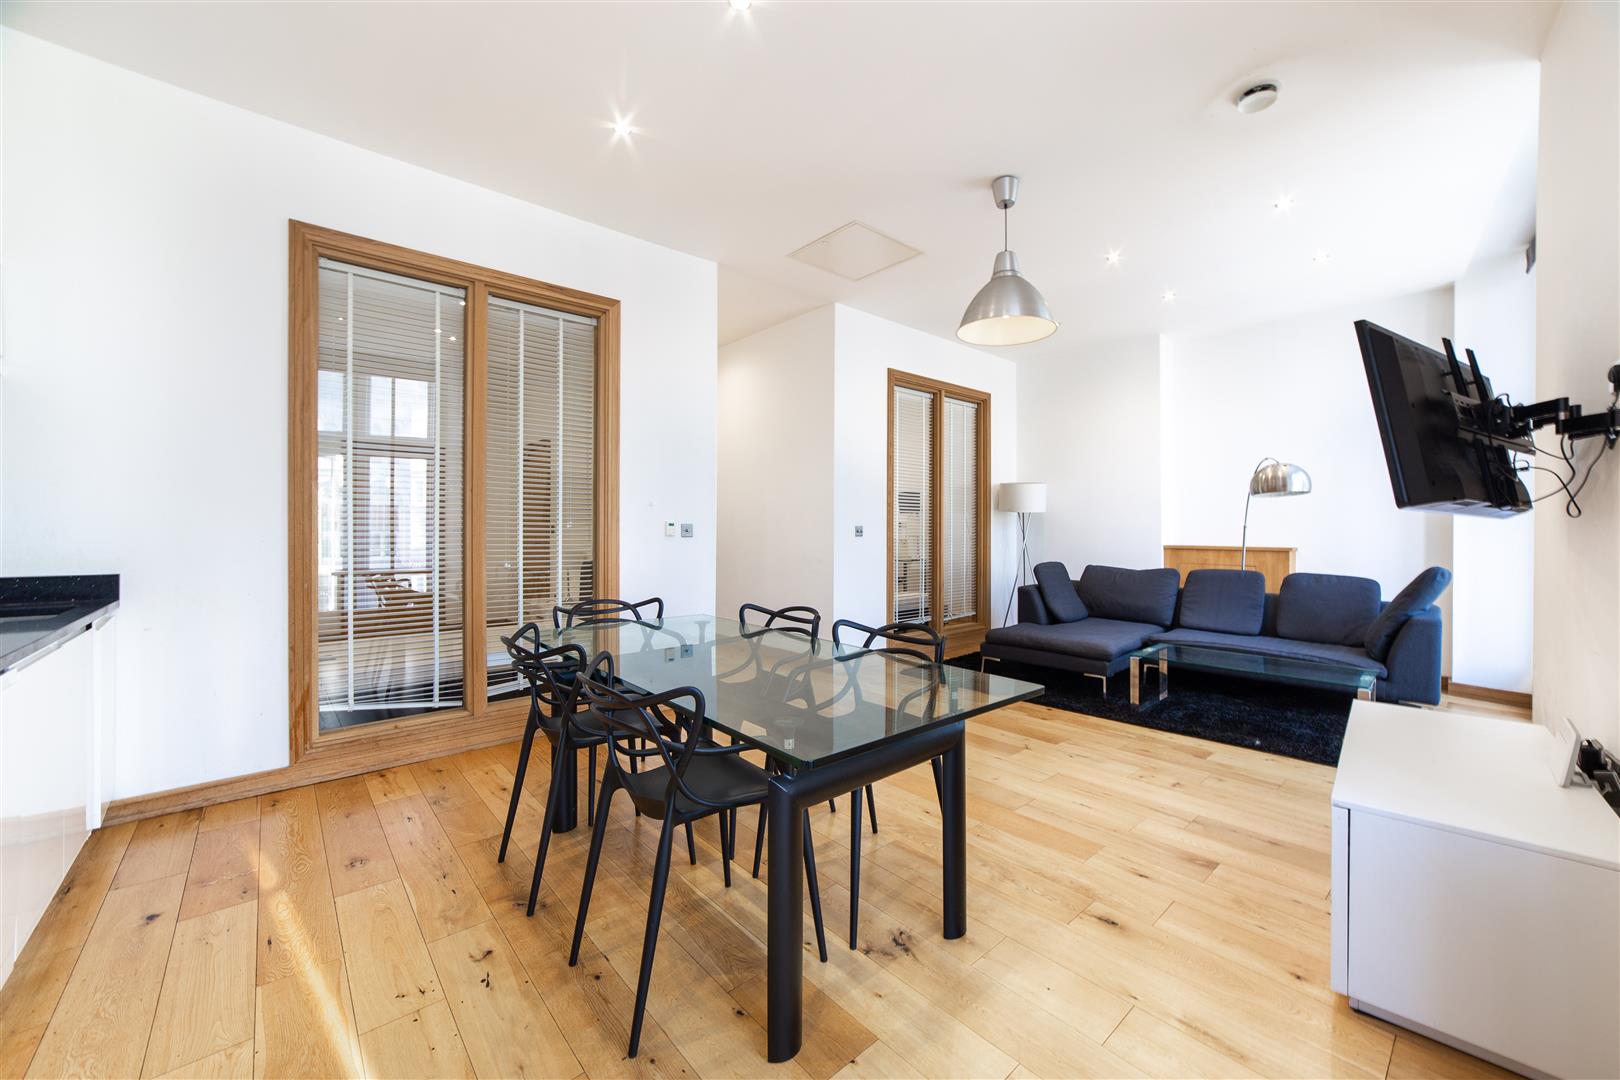 2 bed apartment to rent in Grainger Street, City Centre - Property Image 1